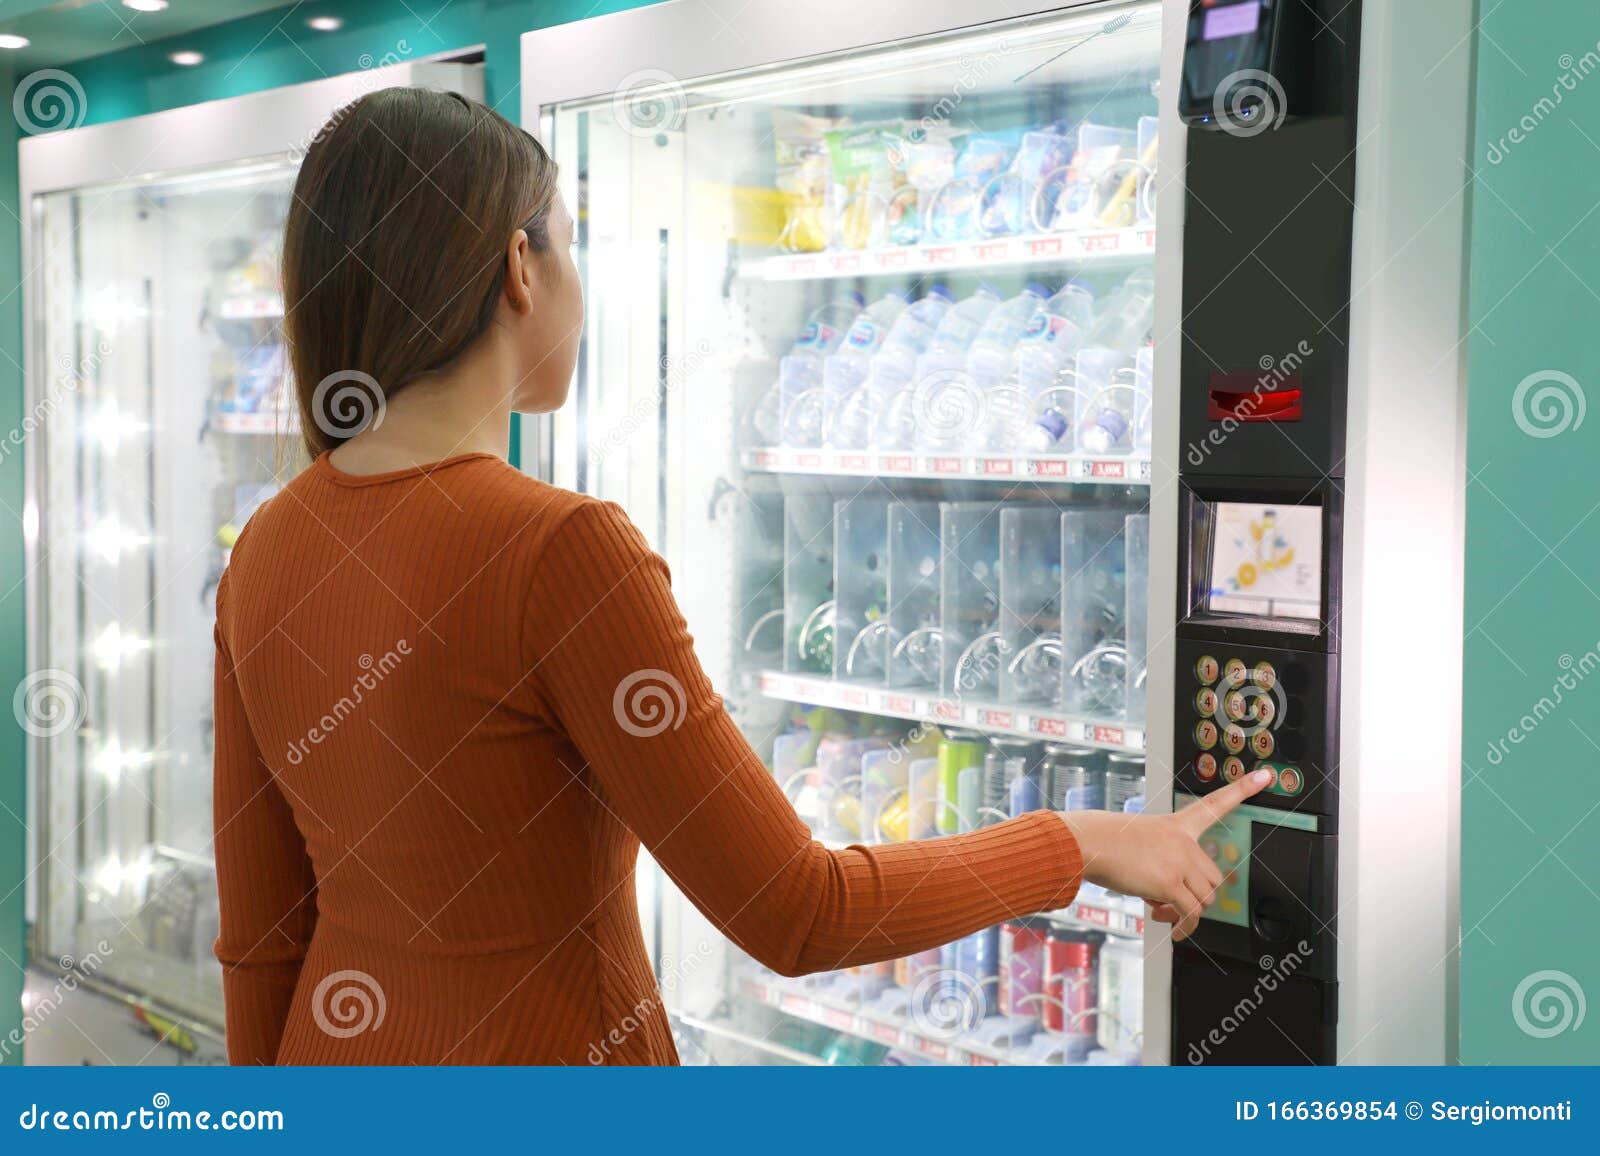 young traveler woman choosing a snack or drink at vending machine in airport. vending machine with girl